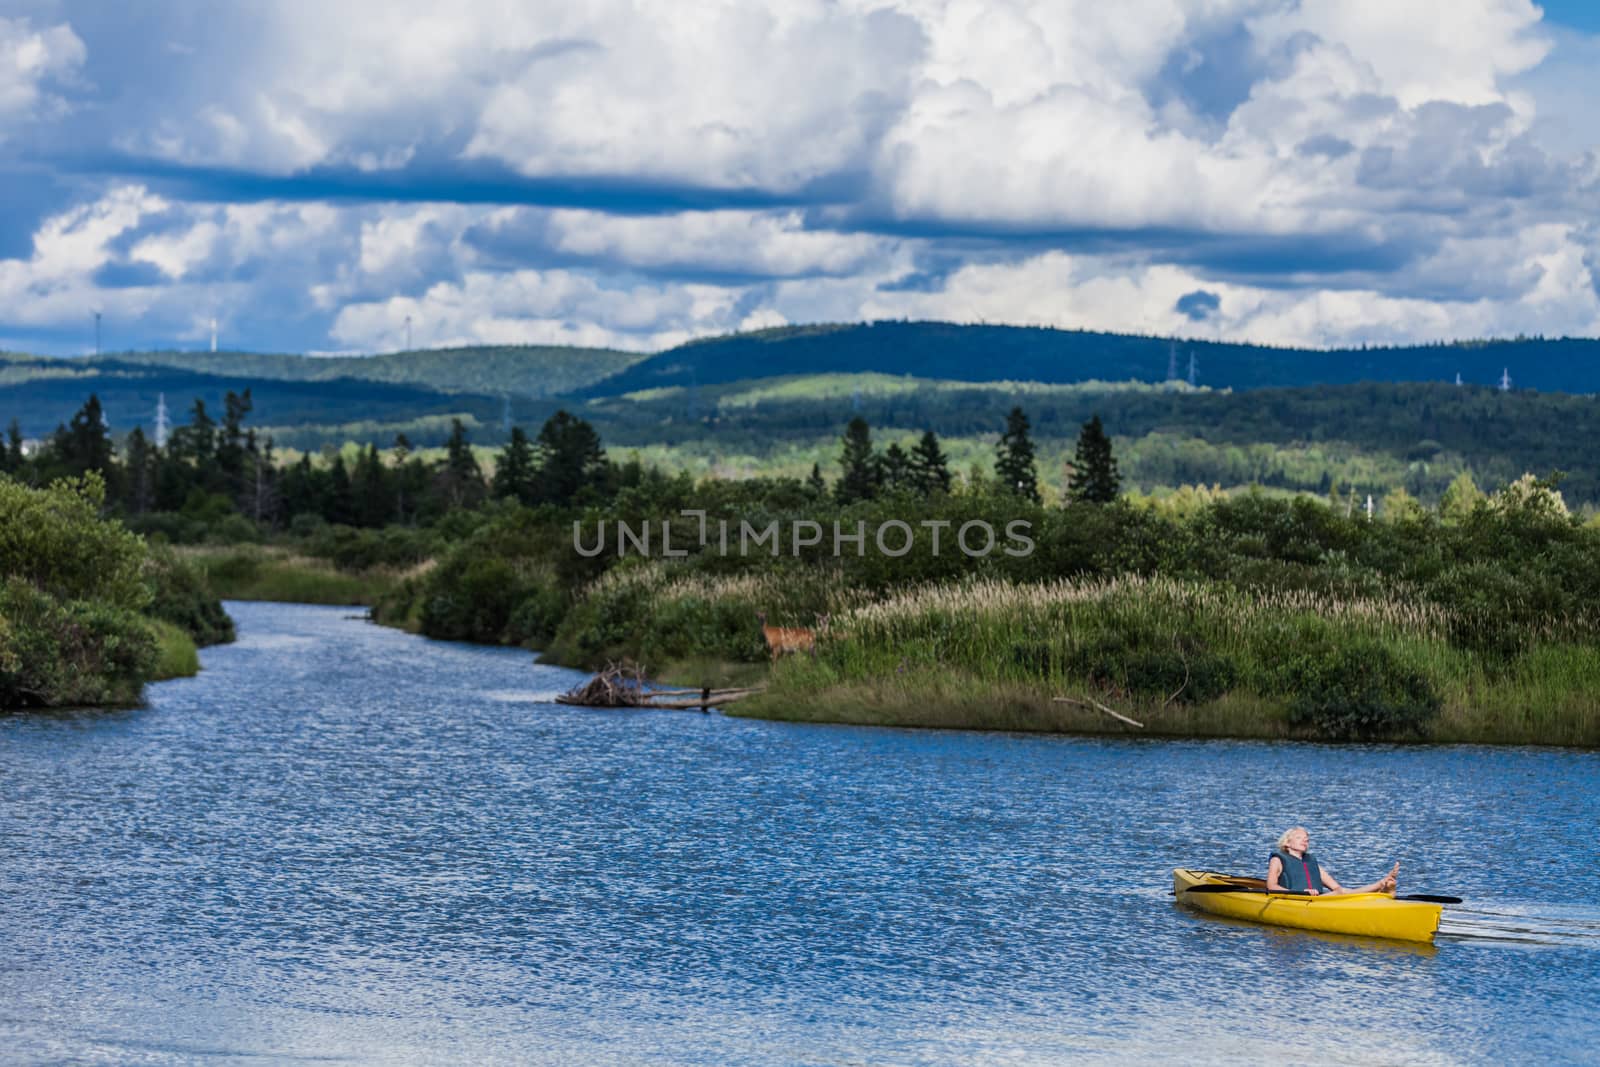 Calm River and Woman relaxing in a Kayak by aetb